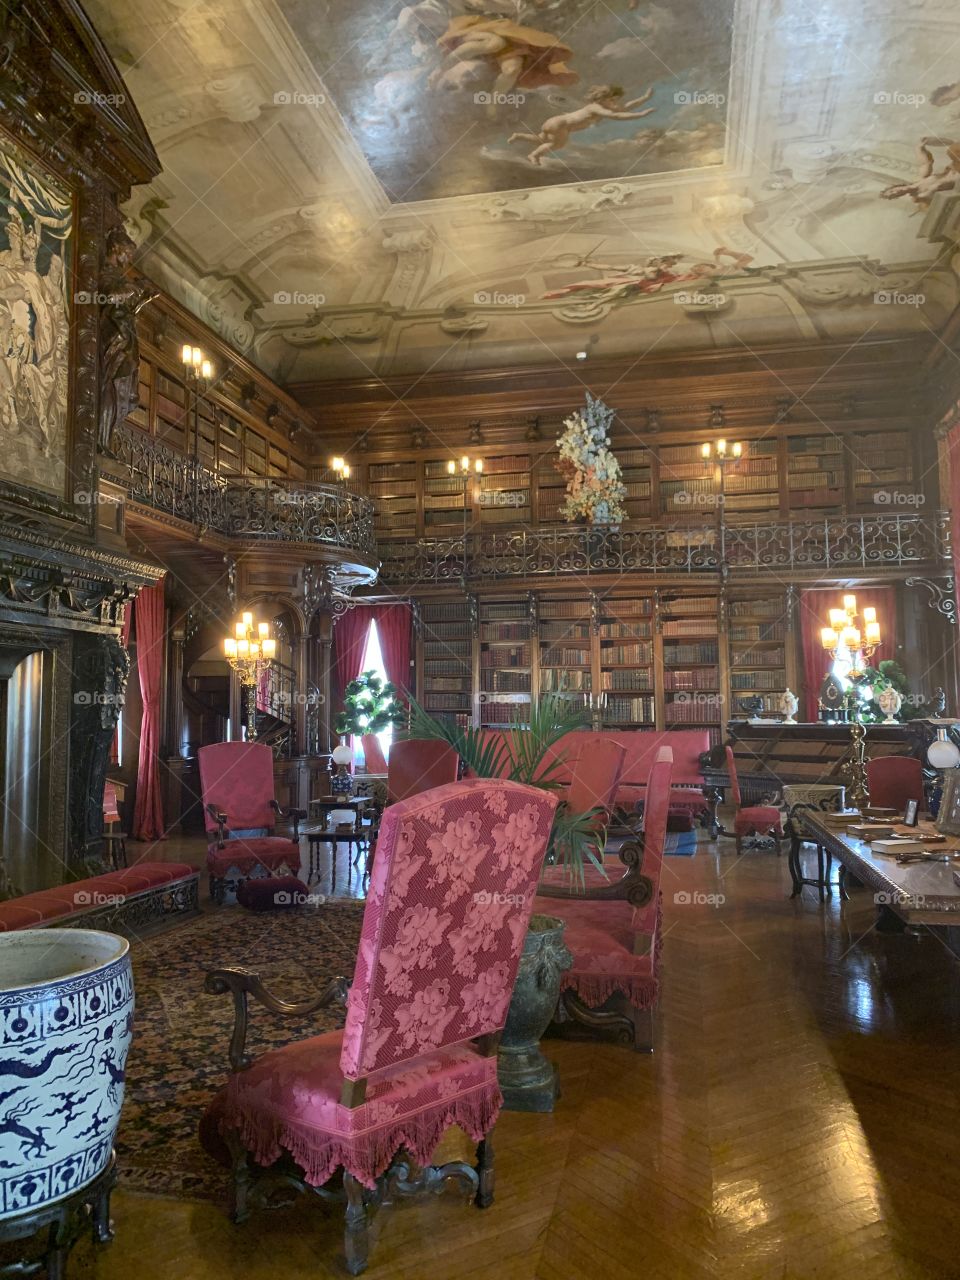 A beautiful library room